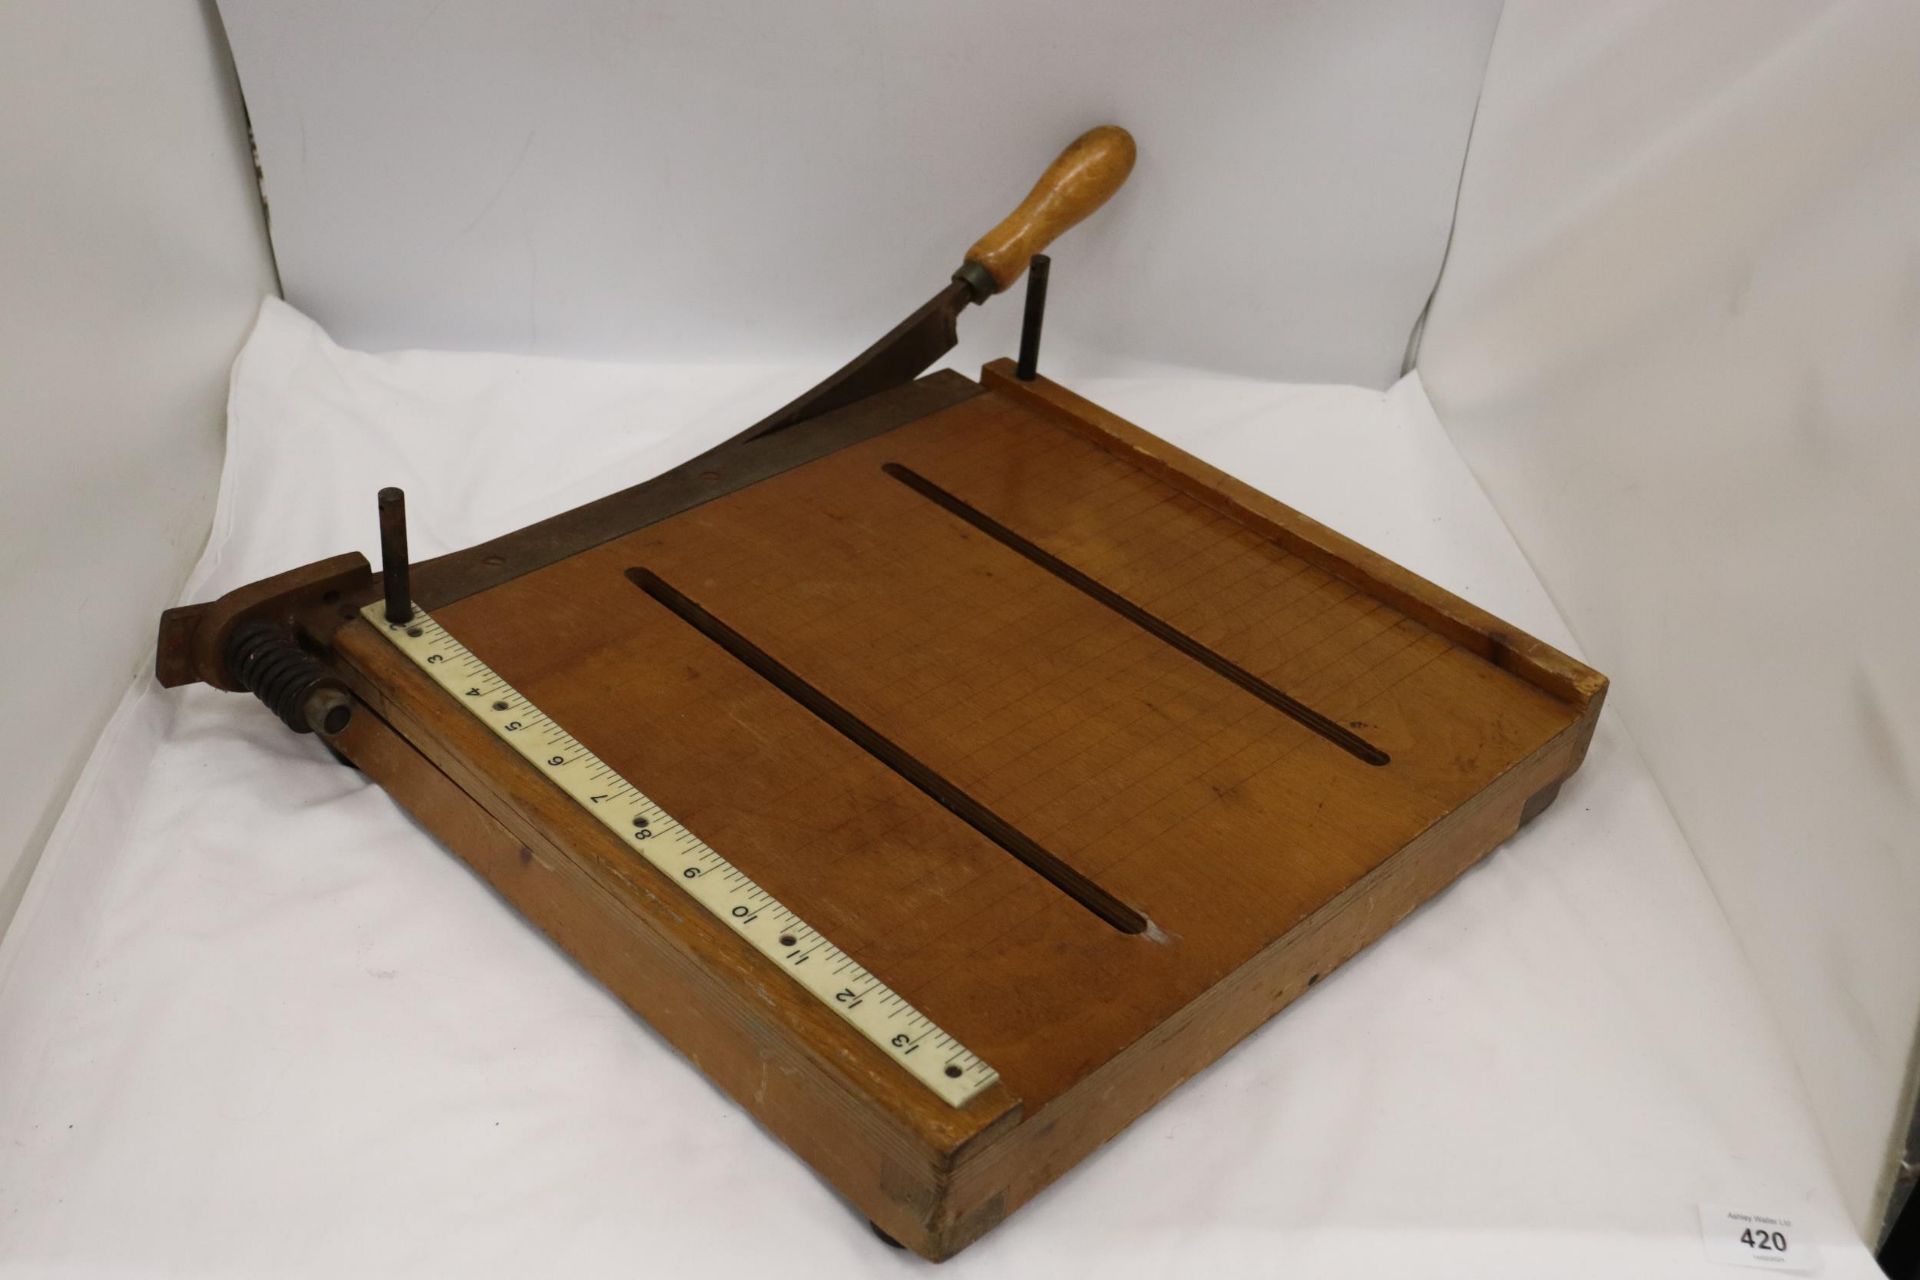 A VINTAGE WOODEN GUILLOTINE - Image 3 of 5